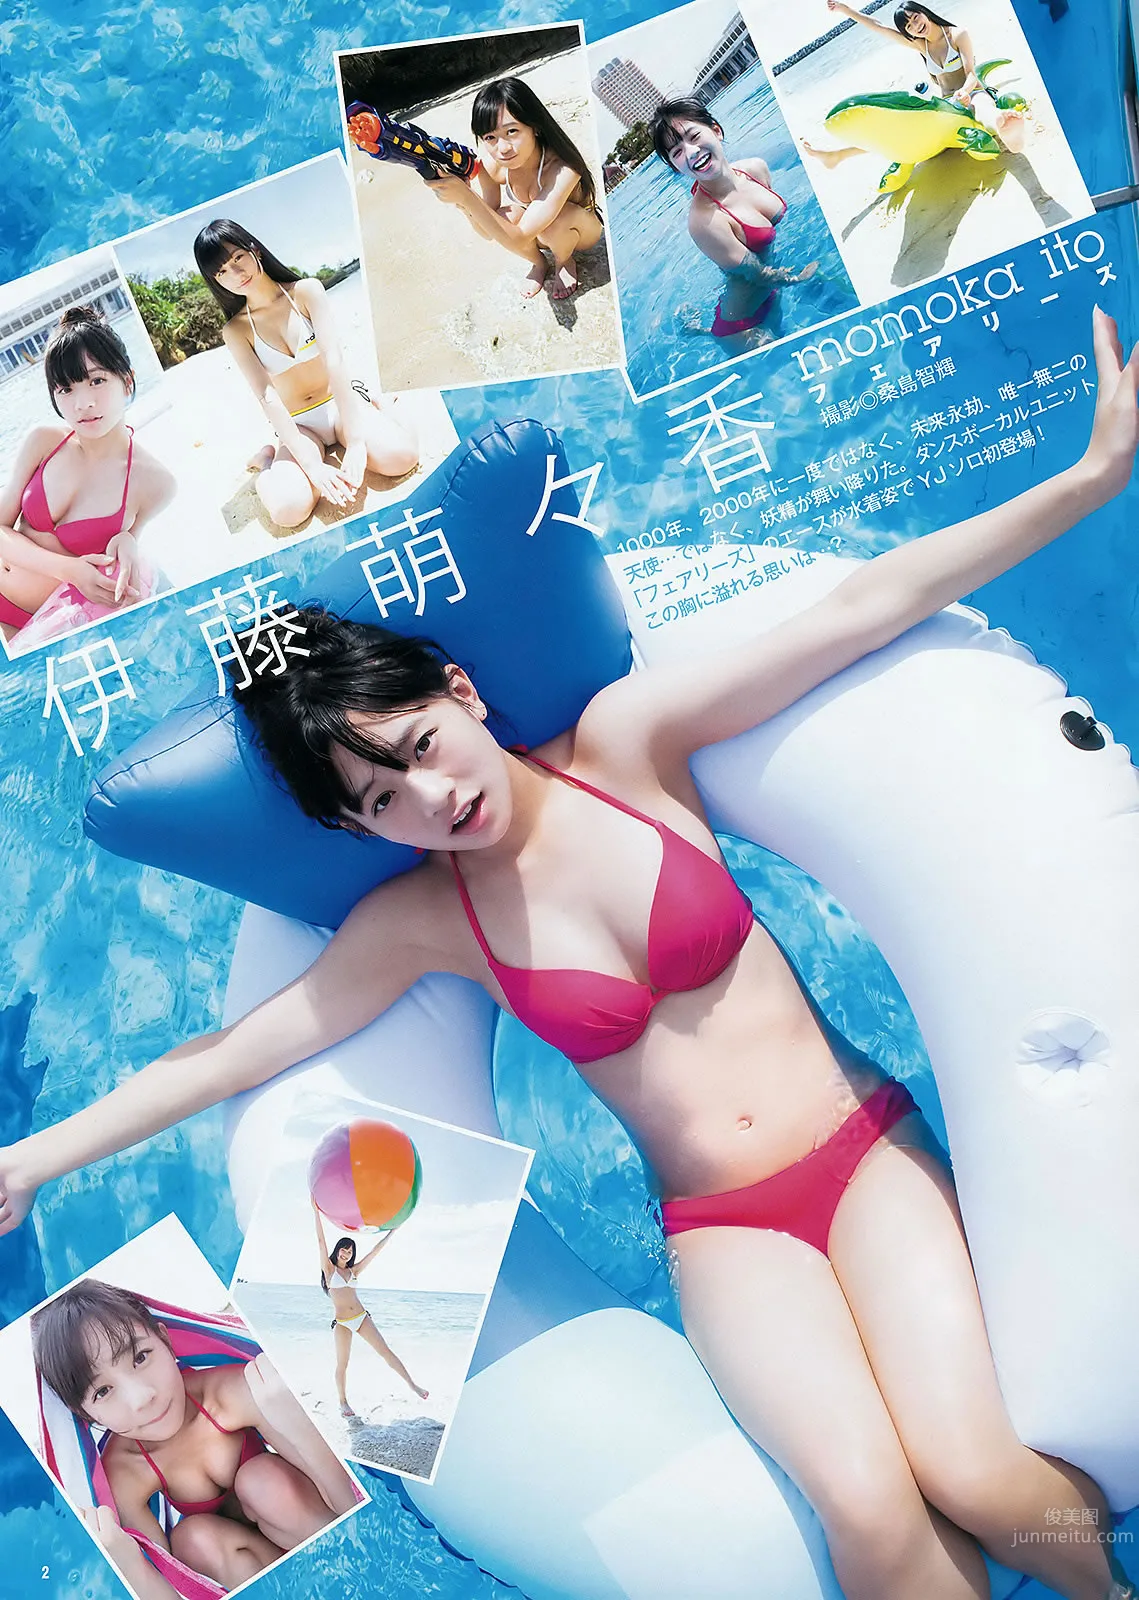 [Weekly Young Jump] 2015 No.44 45 伊藤萌々香 松井珠理奈 篠崎愛 内田理央_4